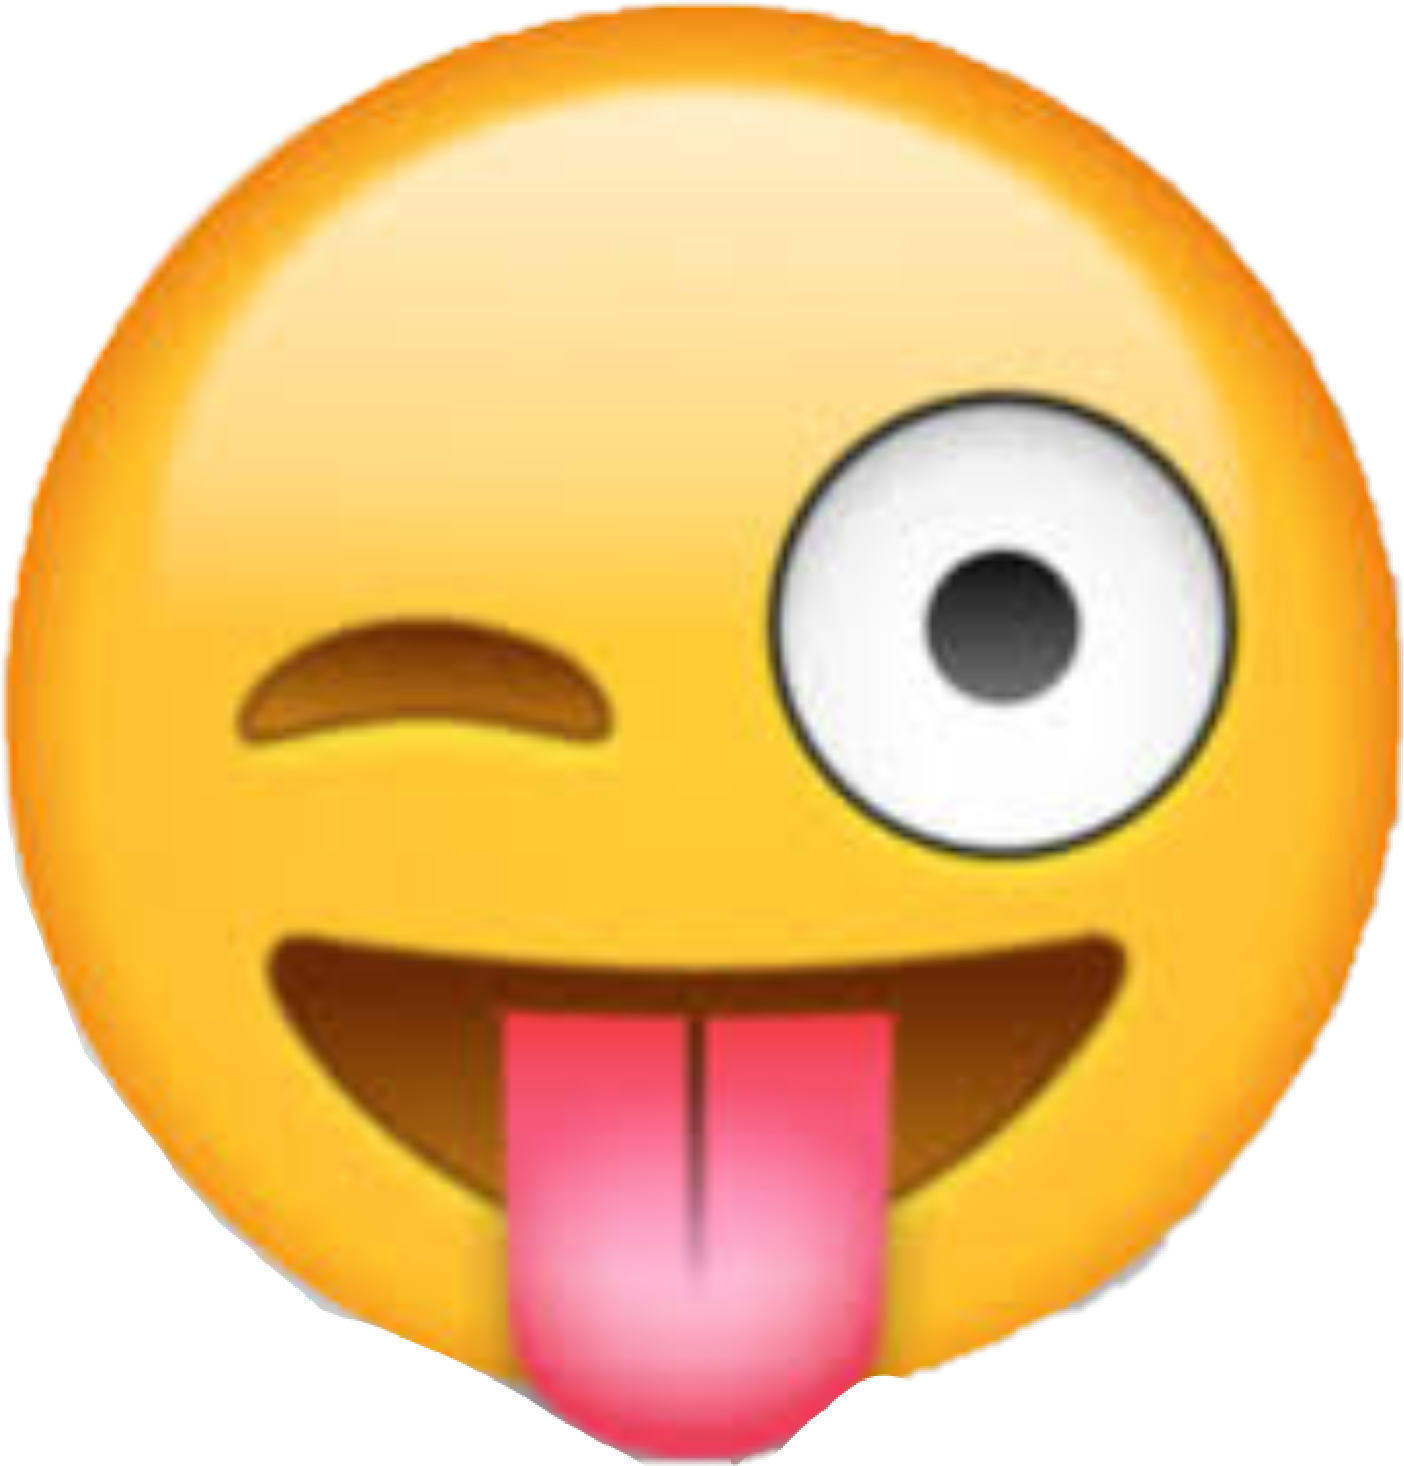 Tongue Out Emoji Transparent All In One Photos